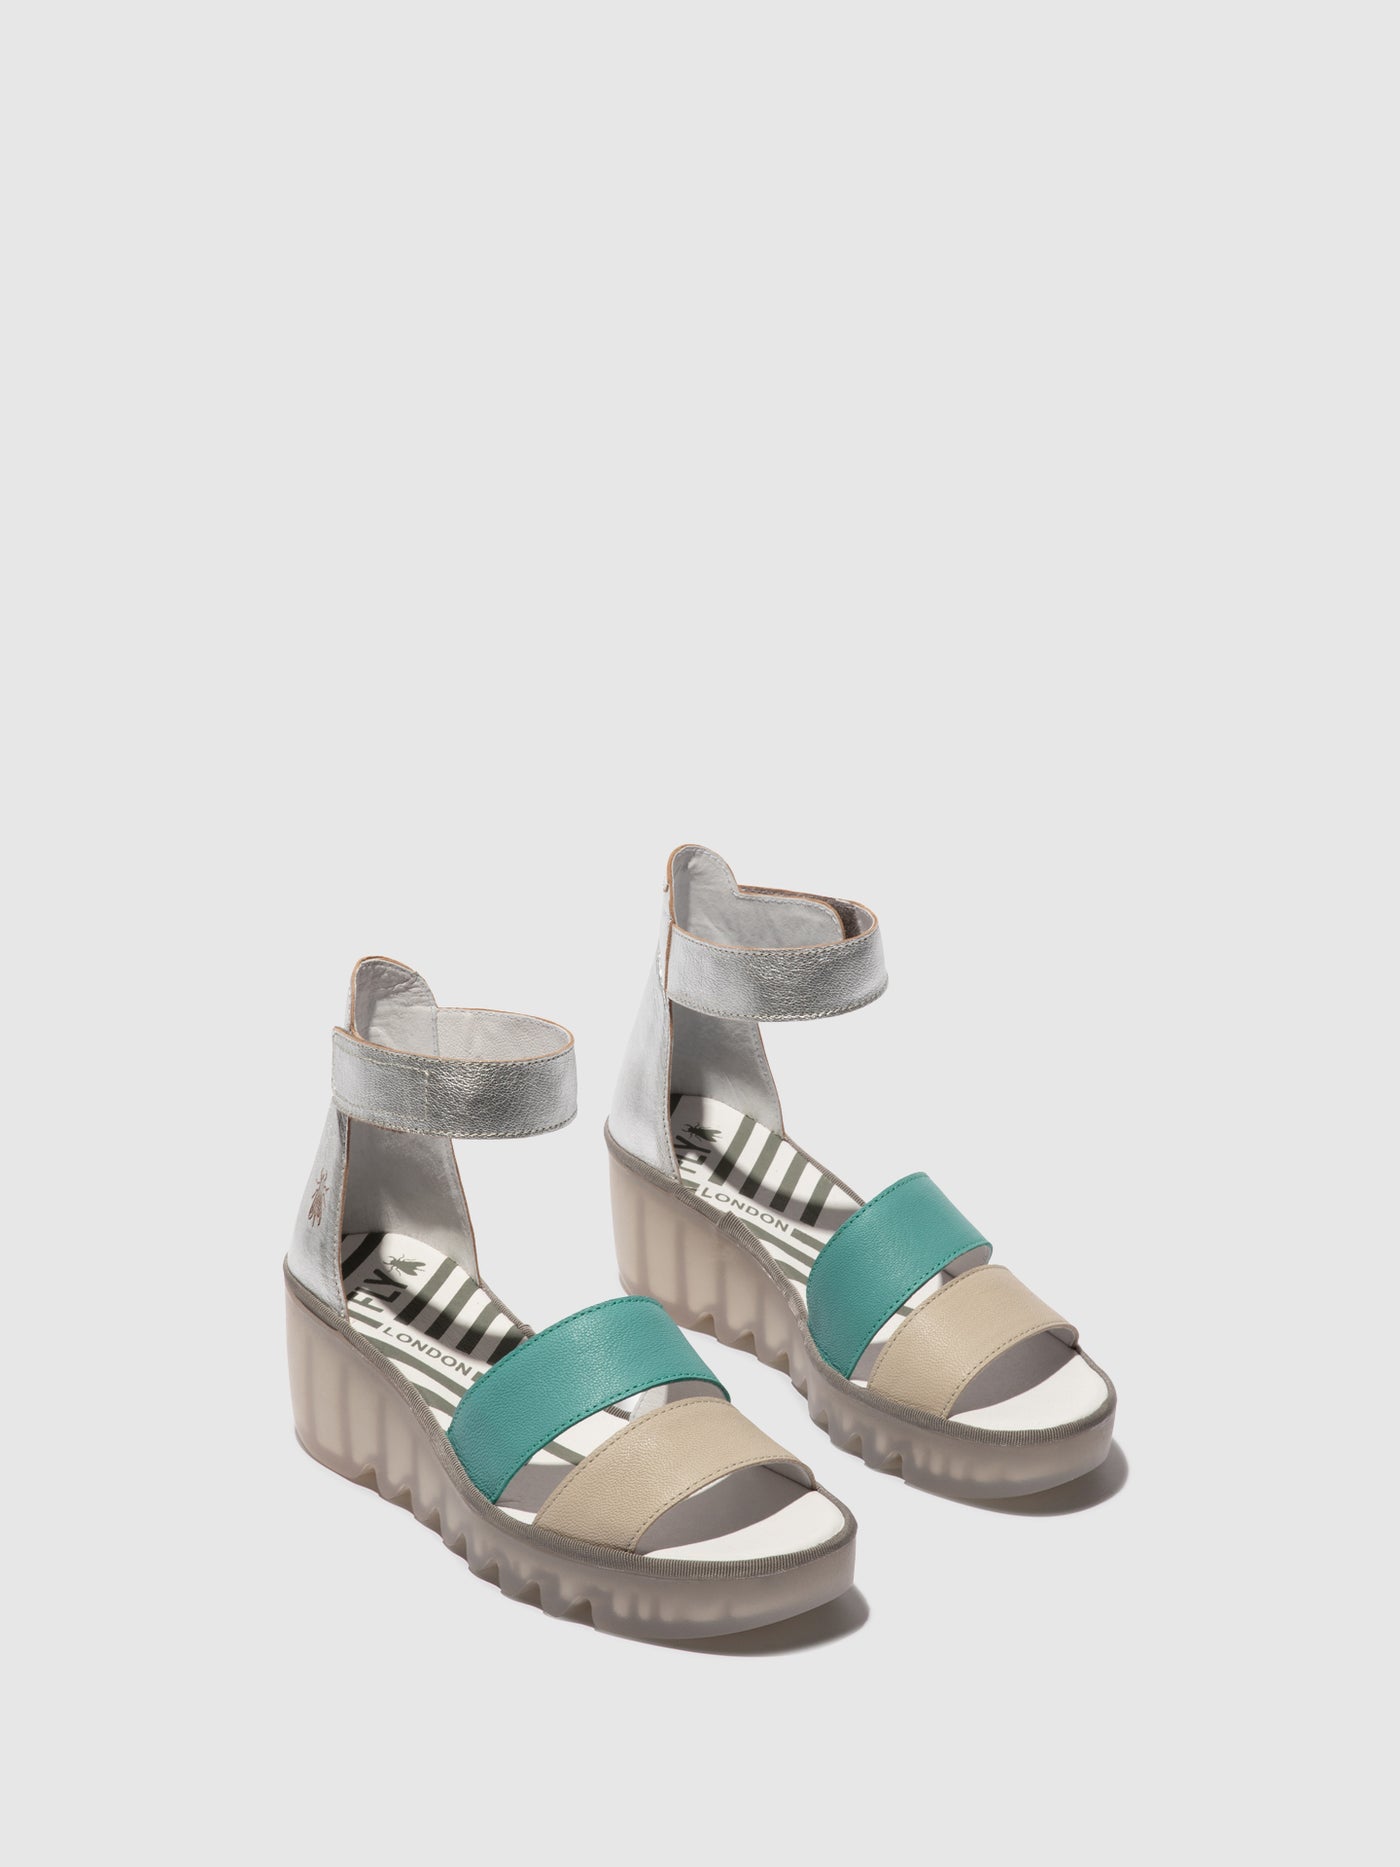 Strappy Sandals BONO290FLY CLOUD/TURQUOISE/SILVER